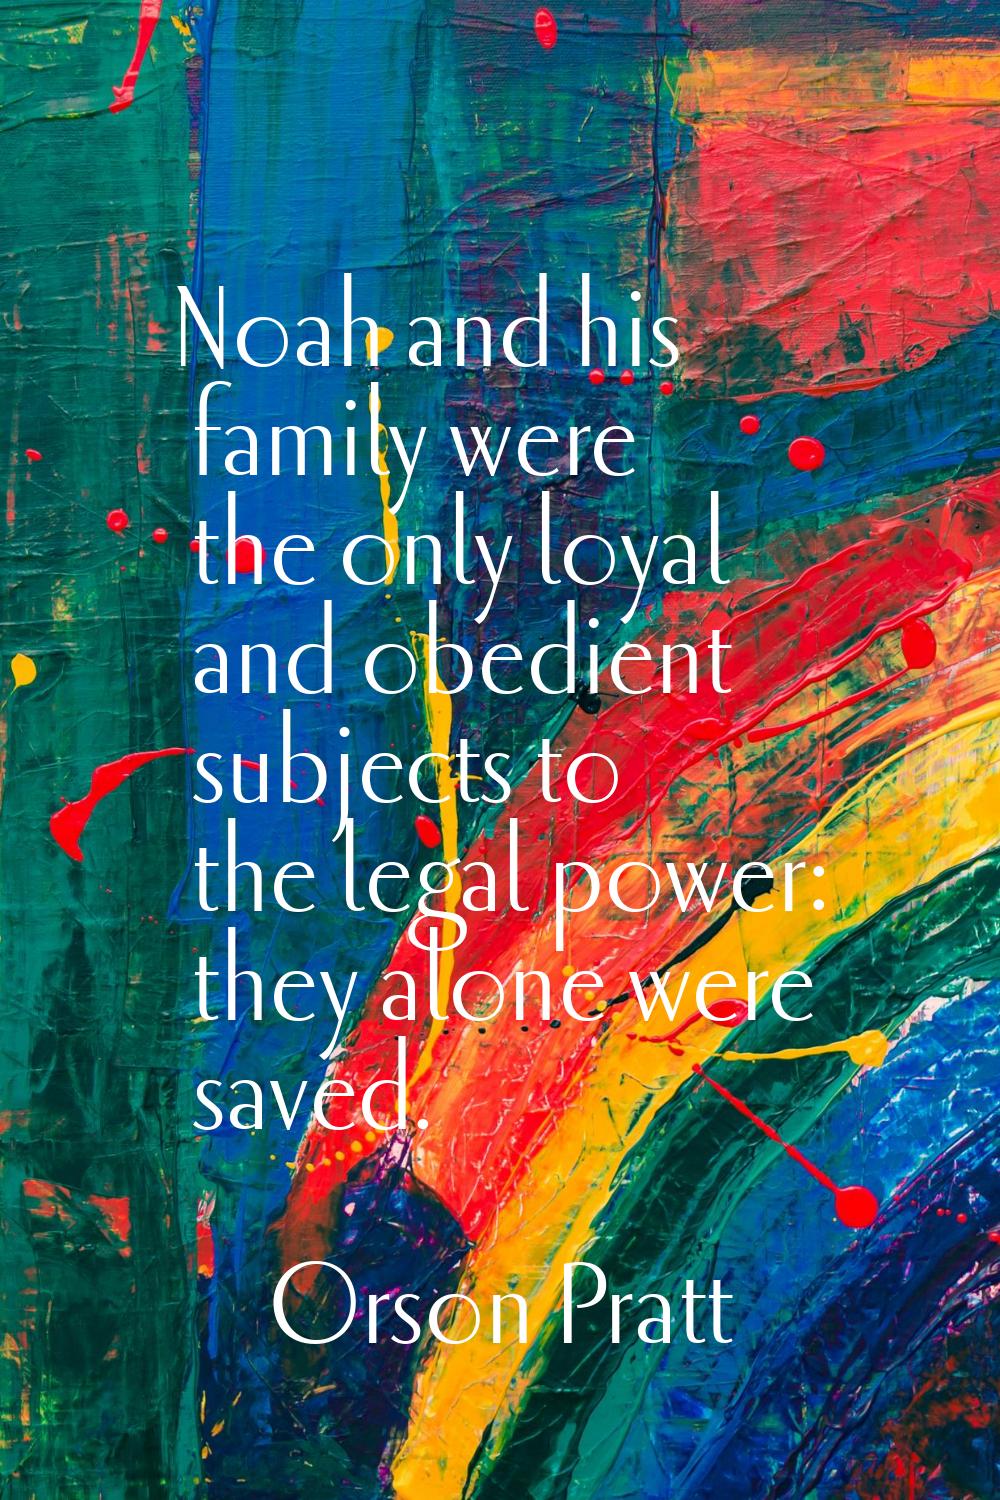 Noah and his family were the only loyal and obedient subjects to the legal power: they alone were s